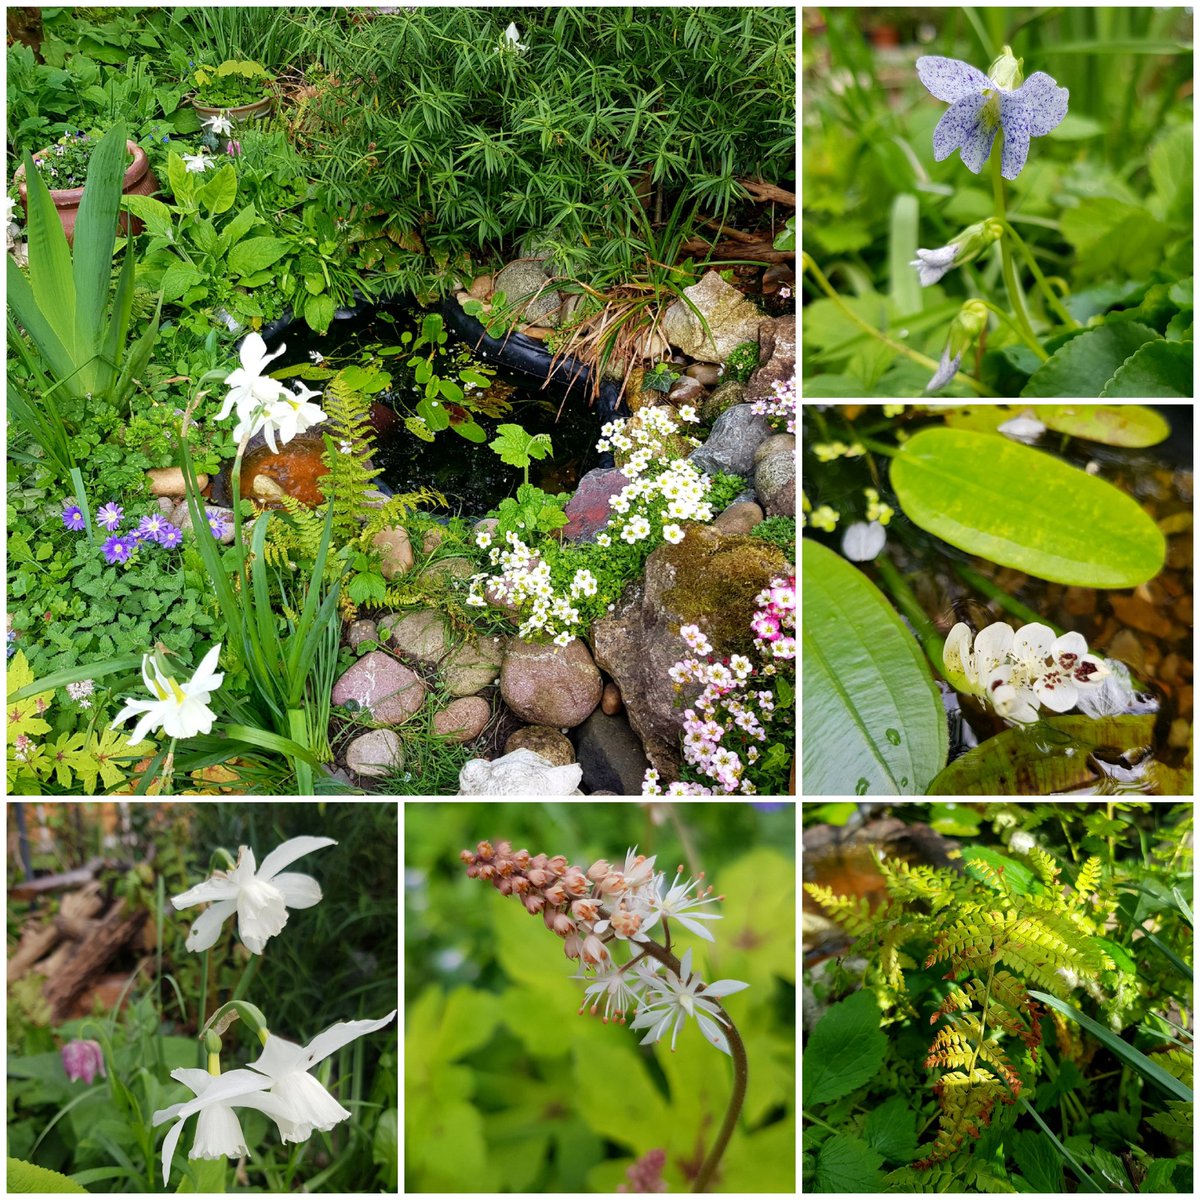 I love my little pond in spring. It has been in for 4 yrs and plants are now maturing around it. Some of my faves this spring pictured (Viola Freckles, Water Hawthorn, Fern, Tiarella, Narcissus Thalia). The pond is also full of critters, makes all that initial work worthwhile...